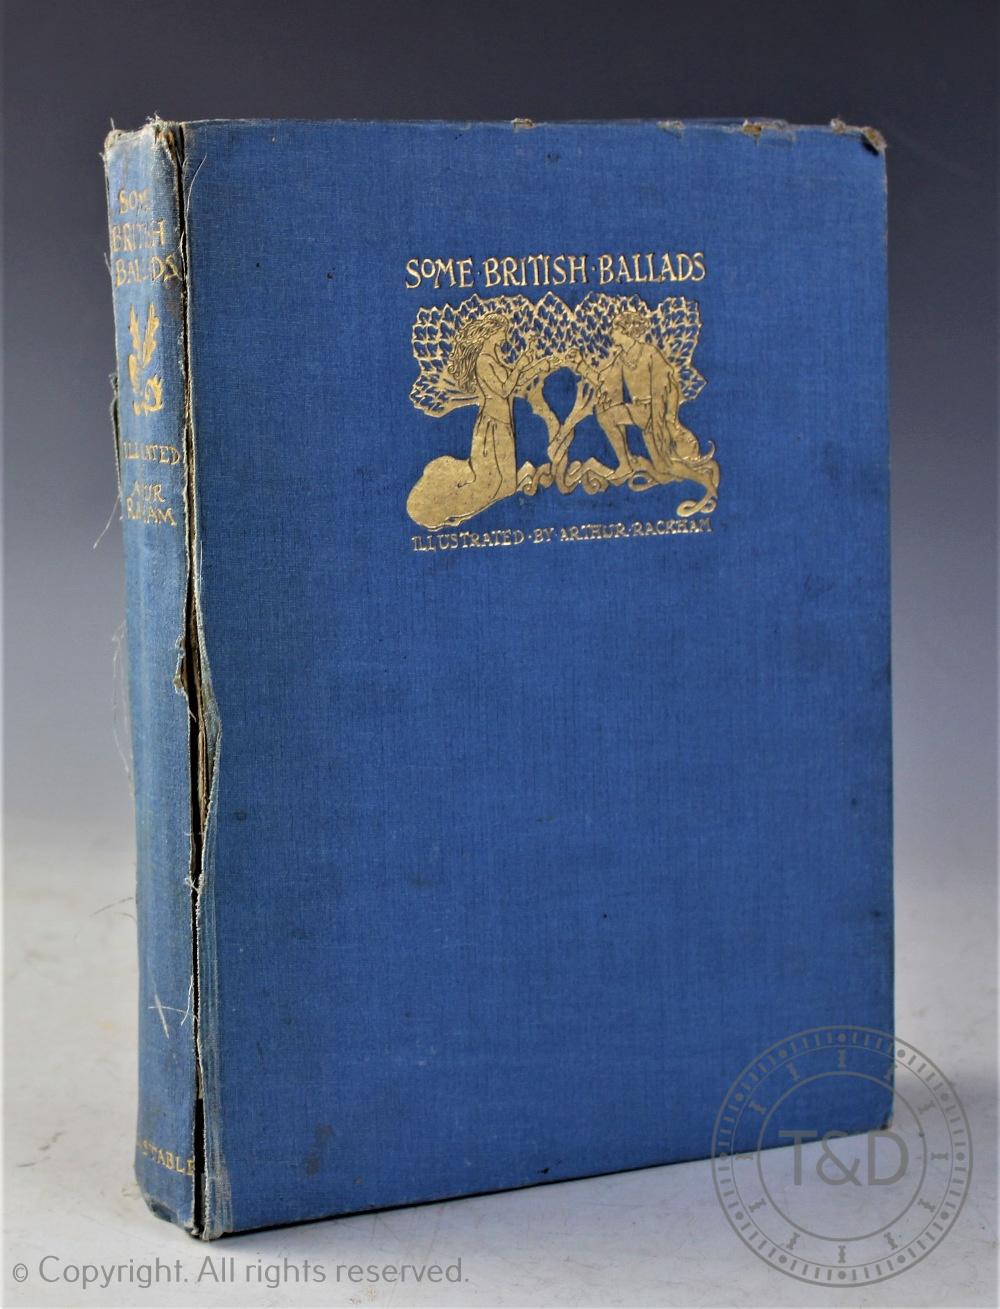 RACKHAM (A), SOME BRITISH BALLADS, tipped in colour plates, blue cloth, Constable & Co,